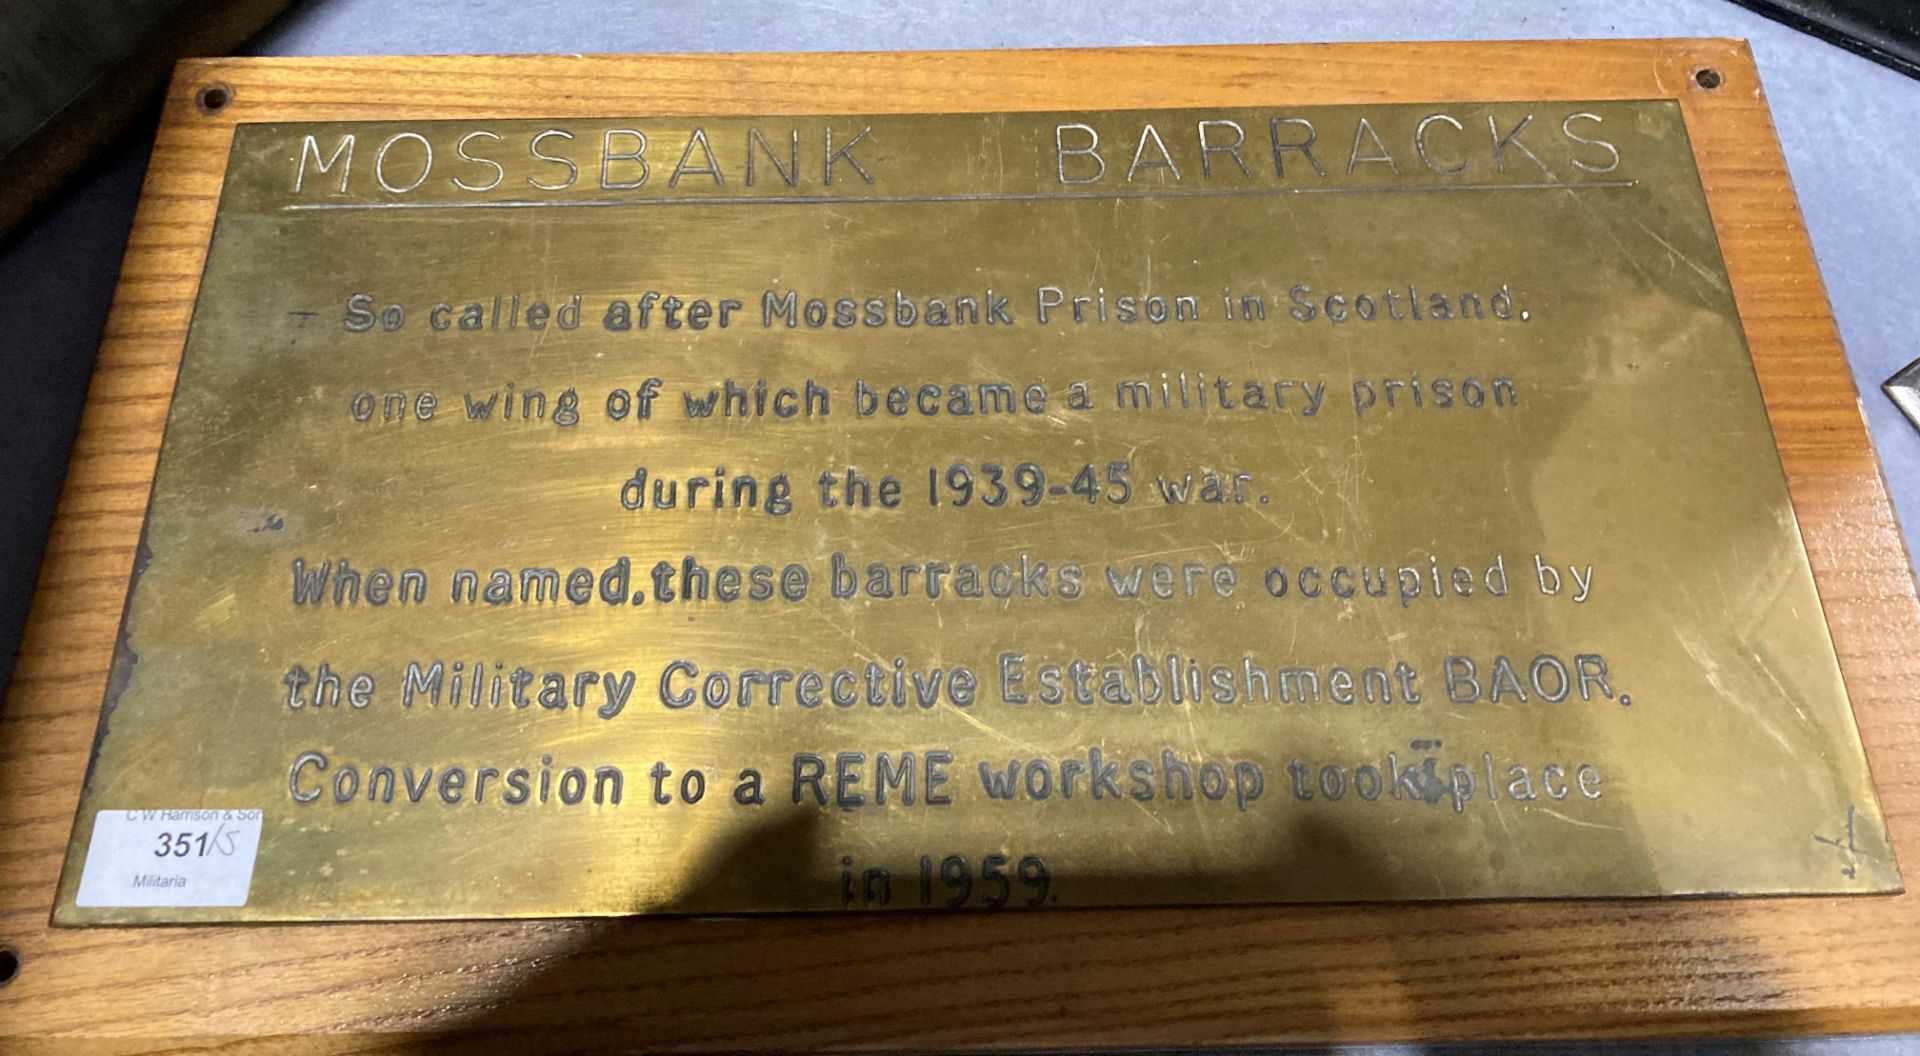 Brass plate on wood mount for Mossbank Barracks in Scotland, - Image 2 of 2